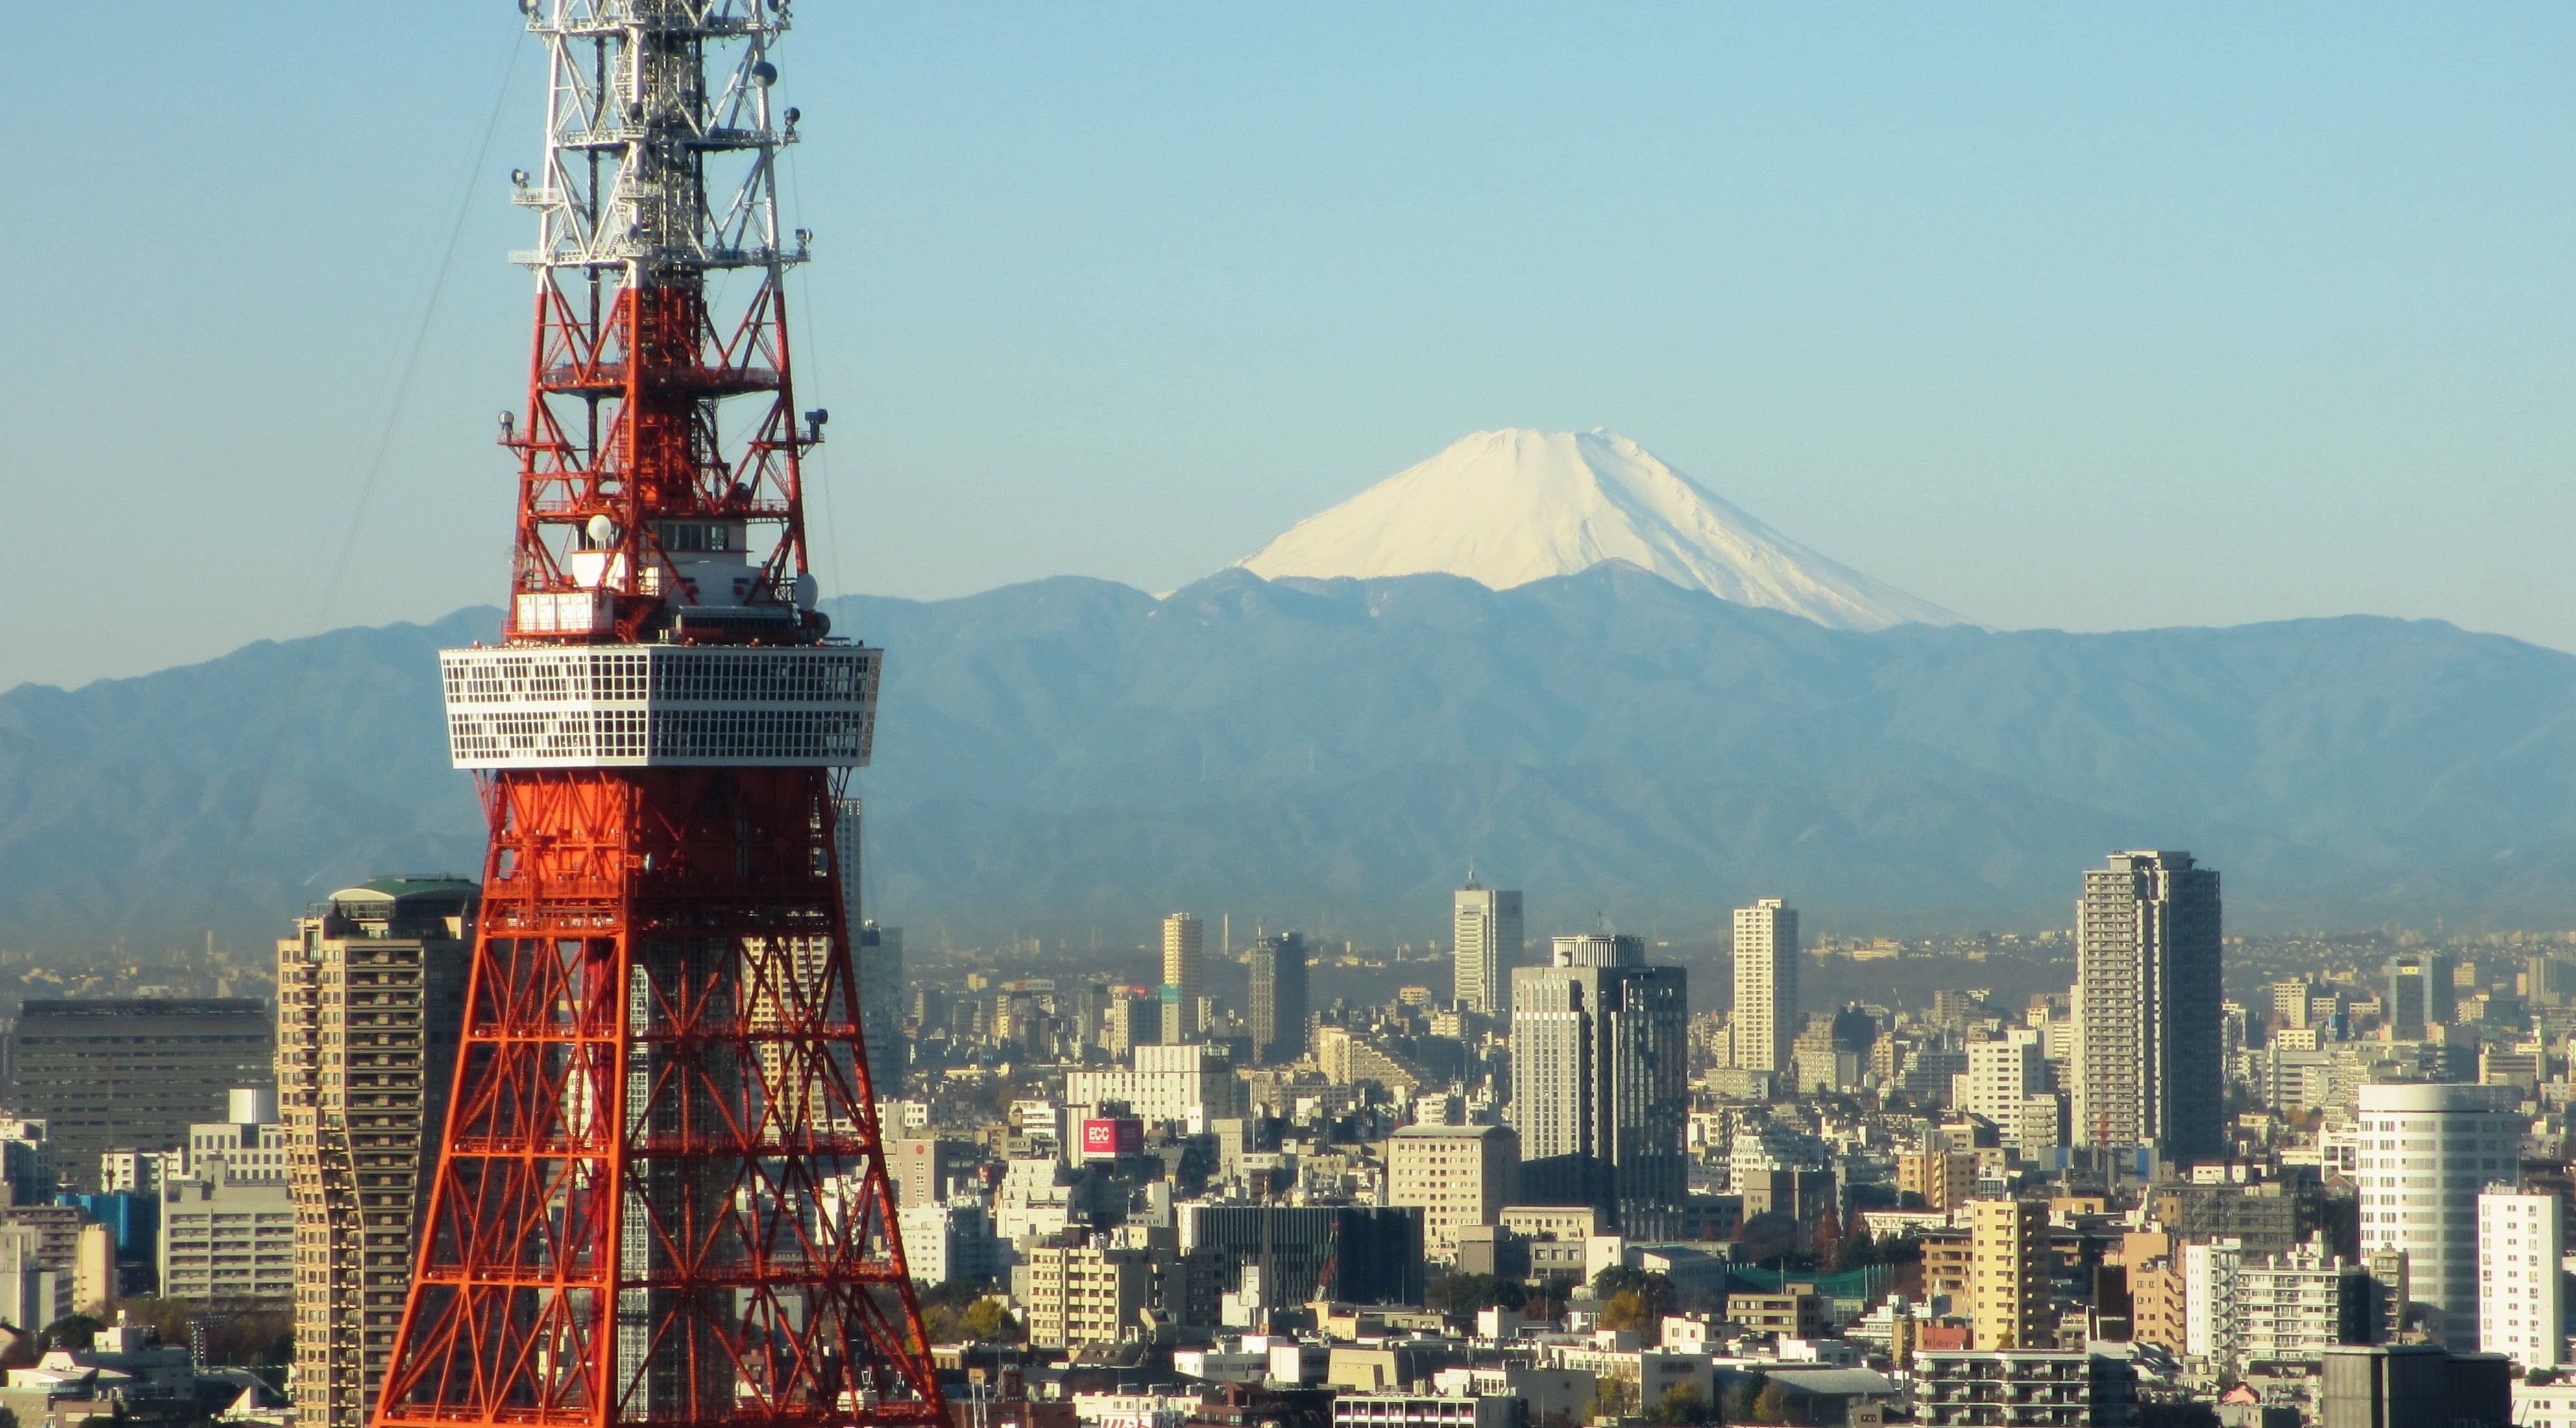 red and white tower, Japan, Tokyo, Tokyo Tower, Mount Fuji, architecture